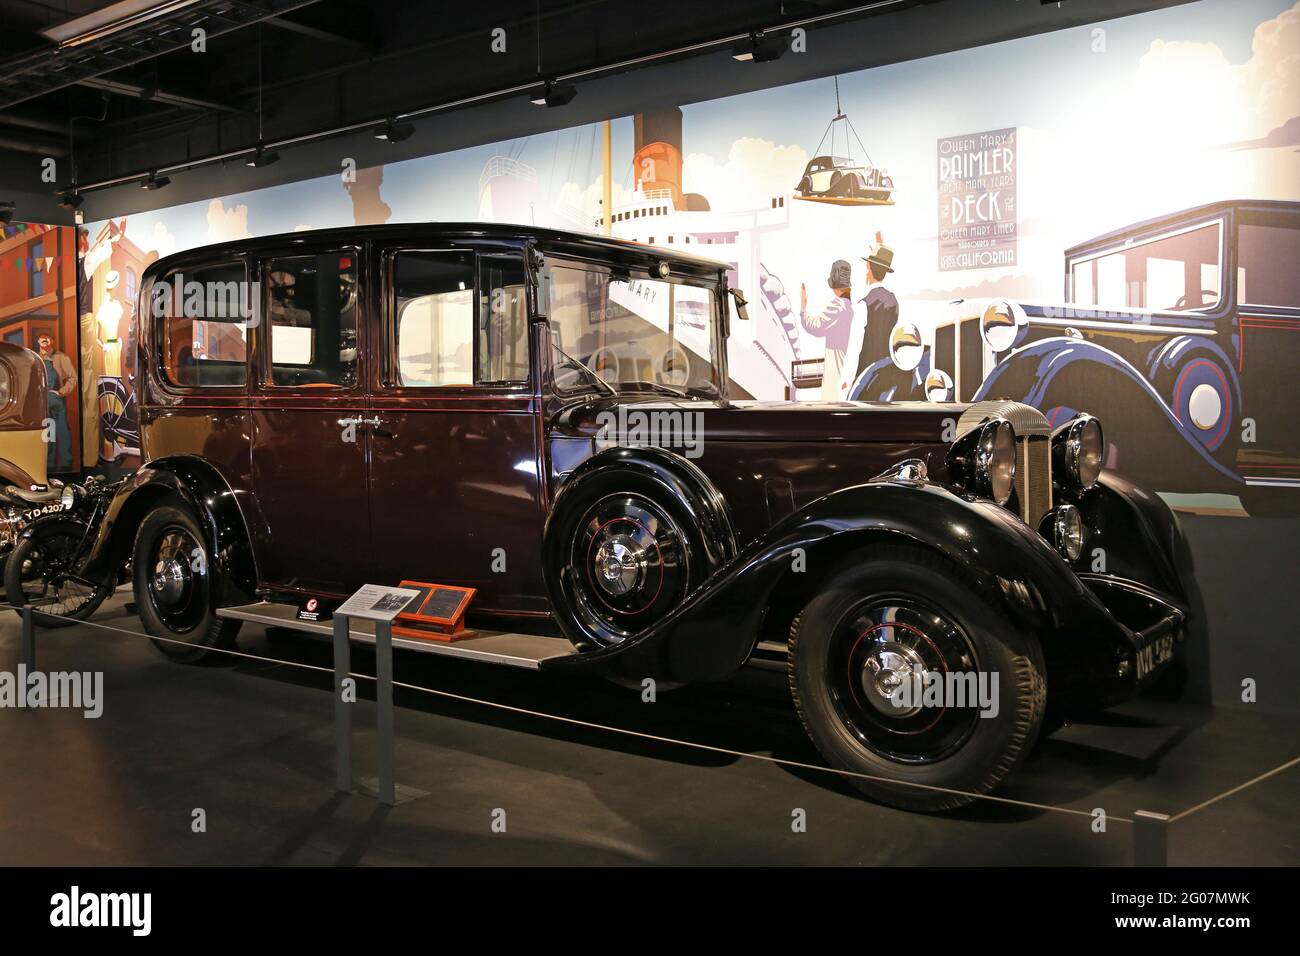 Queen Mary's Daimler Royal Limousine (1935), Coventry transport Museum, Millennium place, Coventry, West Midlands, Angleterre, Grande-Bretagne, Royaume-Uni, Europe Banque D'Images